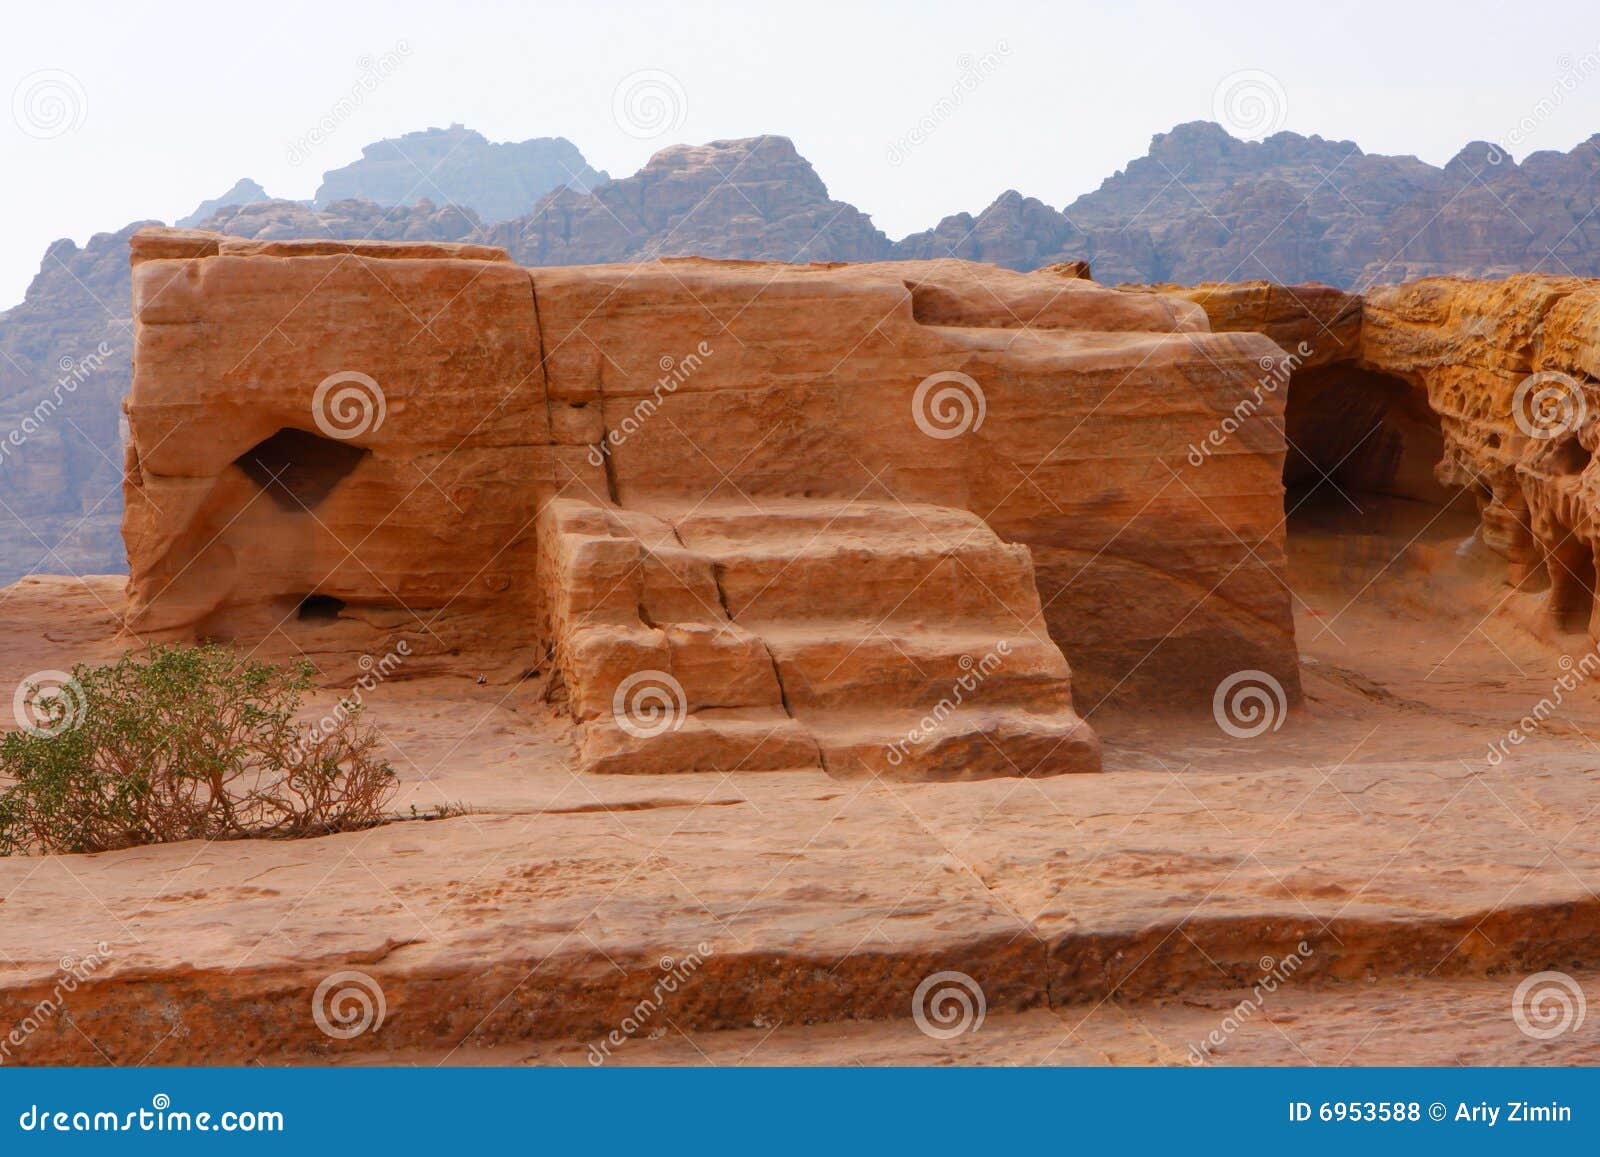 sacrifice place in ancient petra,